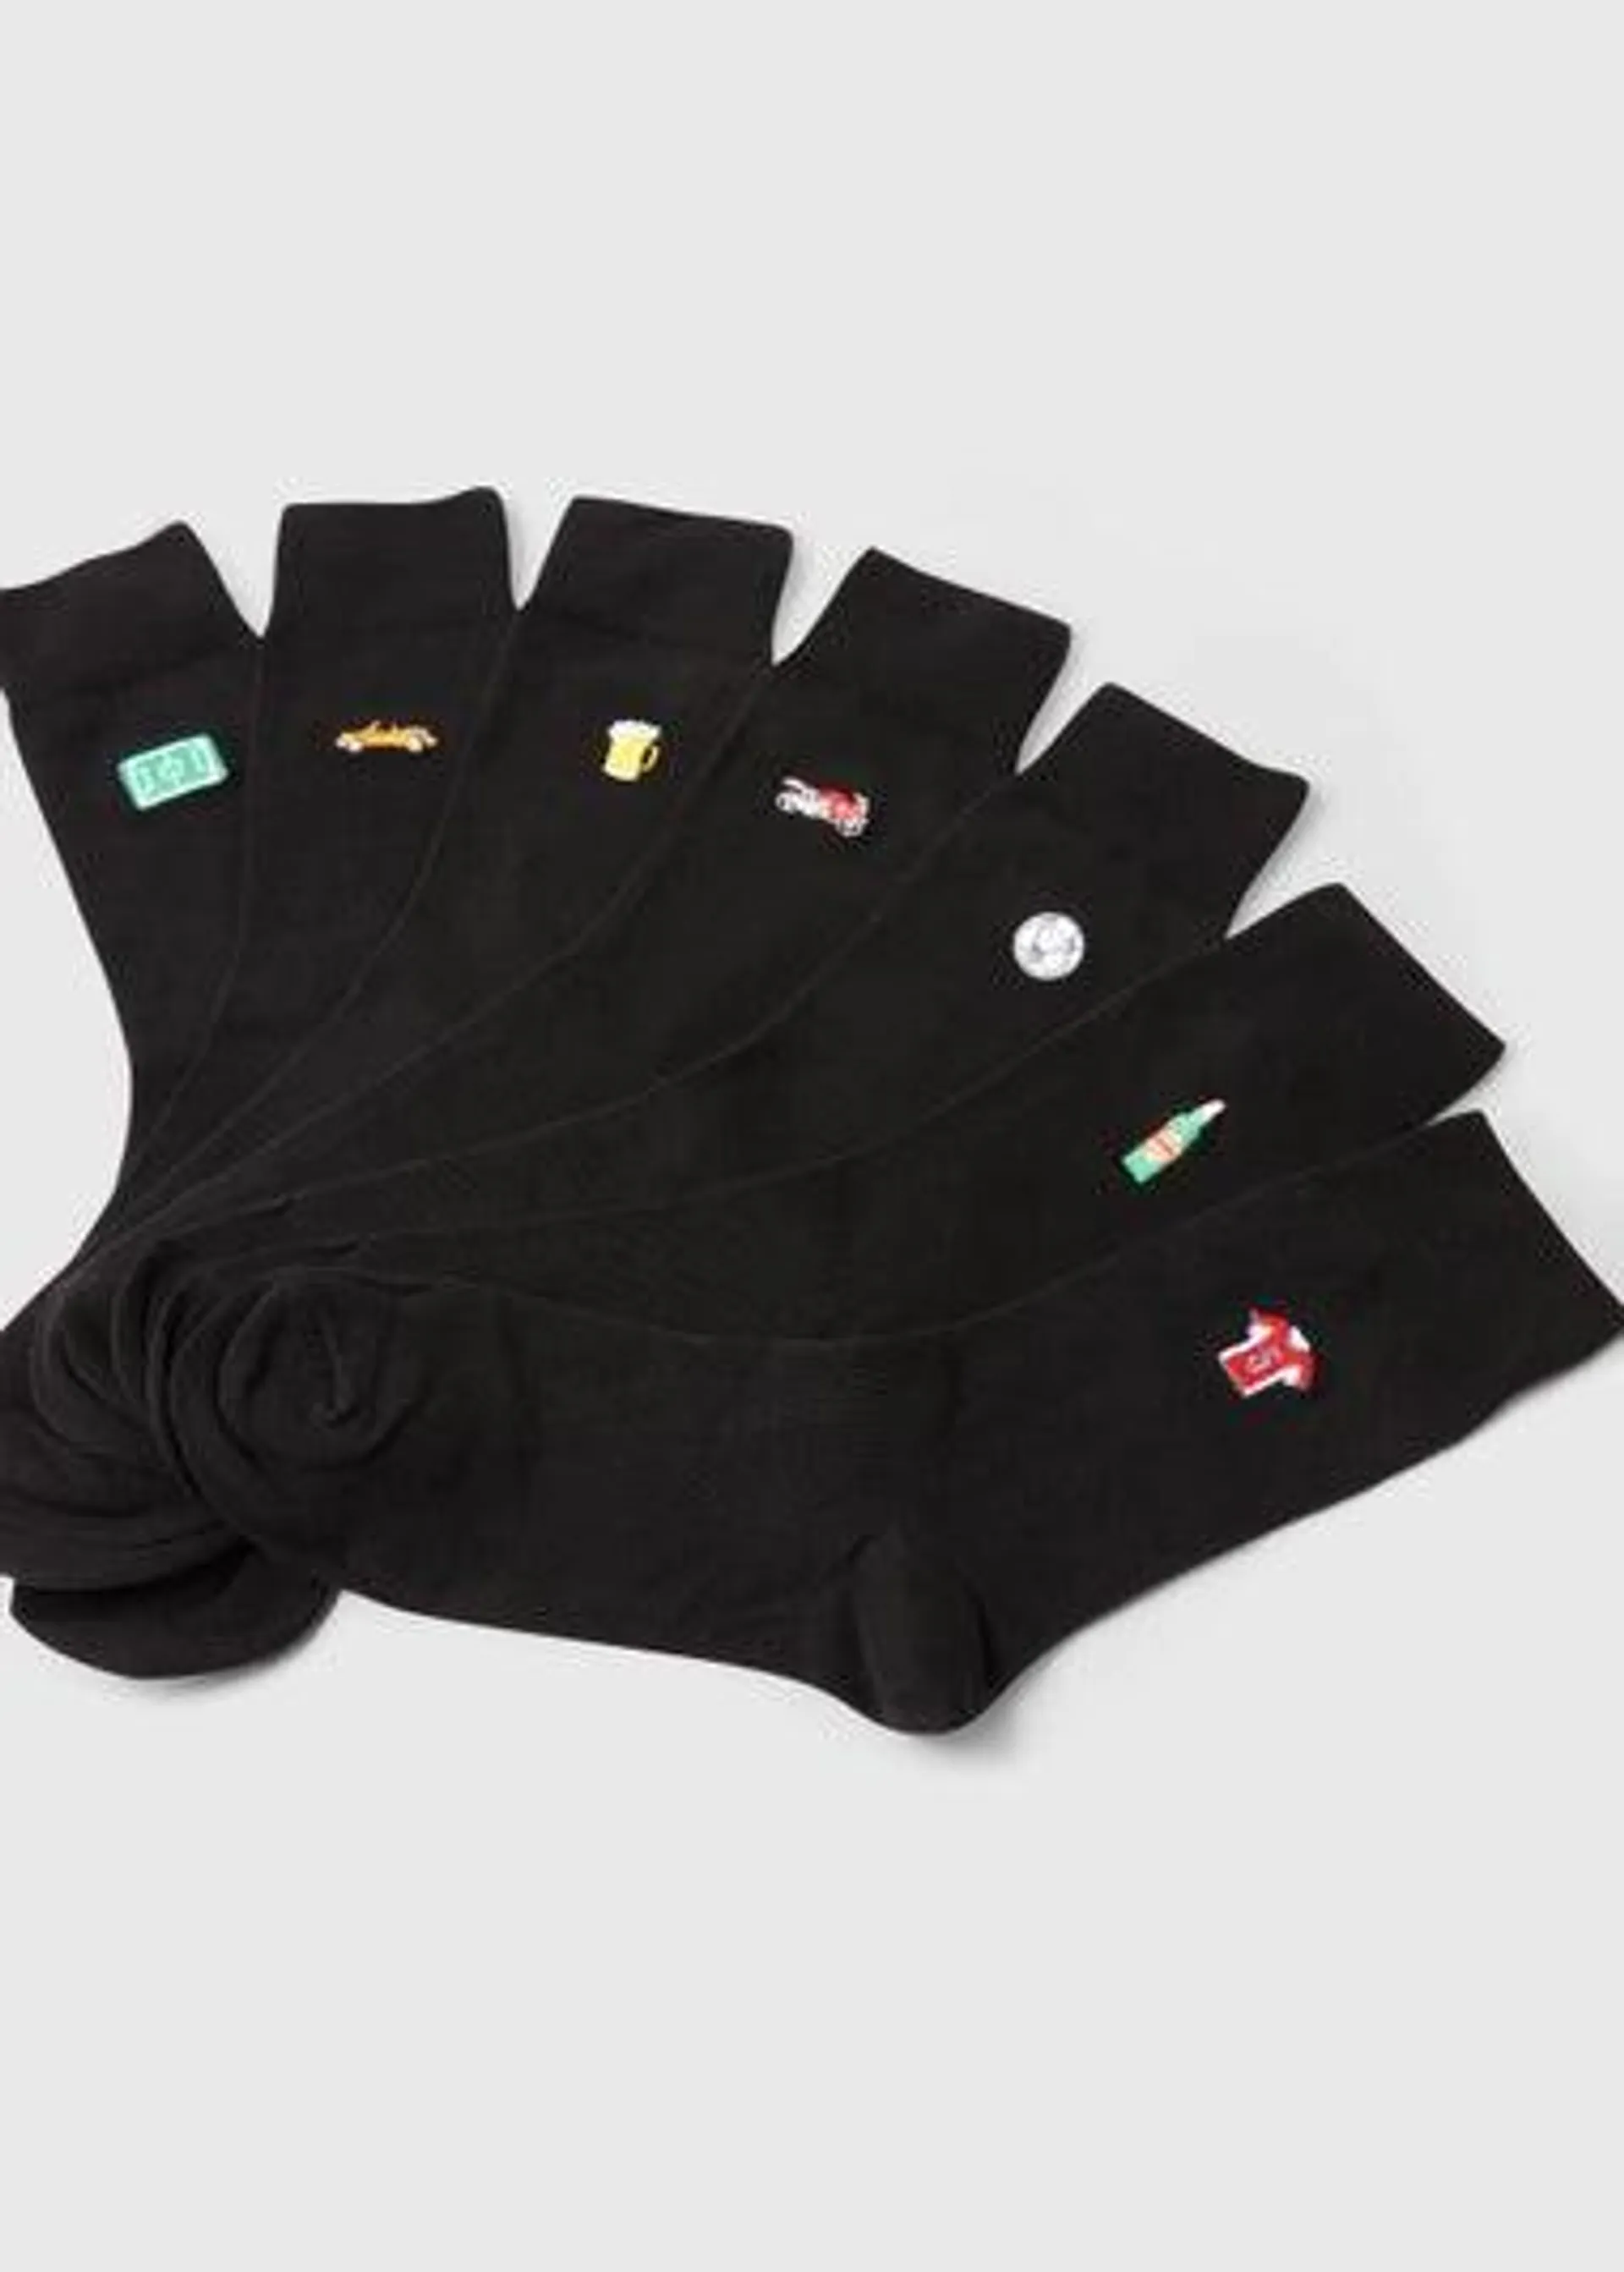 7 Pack Black Sports & Car Embroidery Socks - Sizes 6 - 8.5